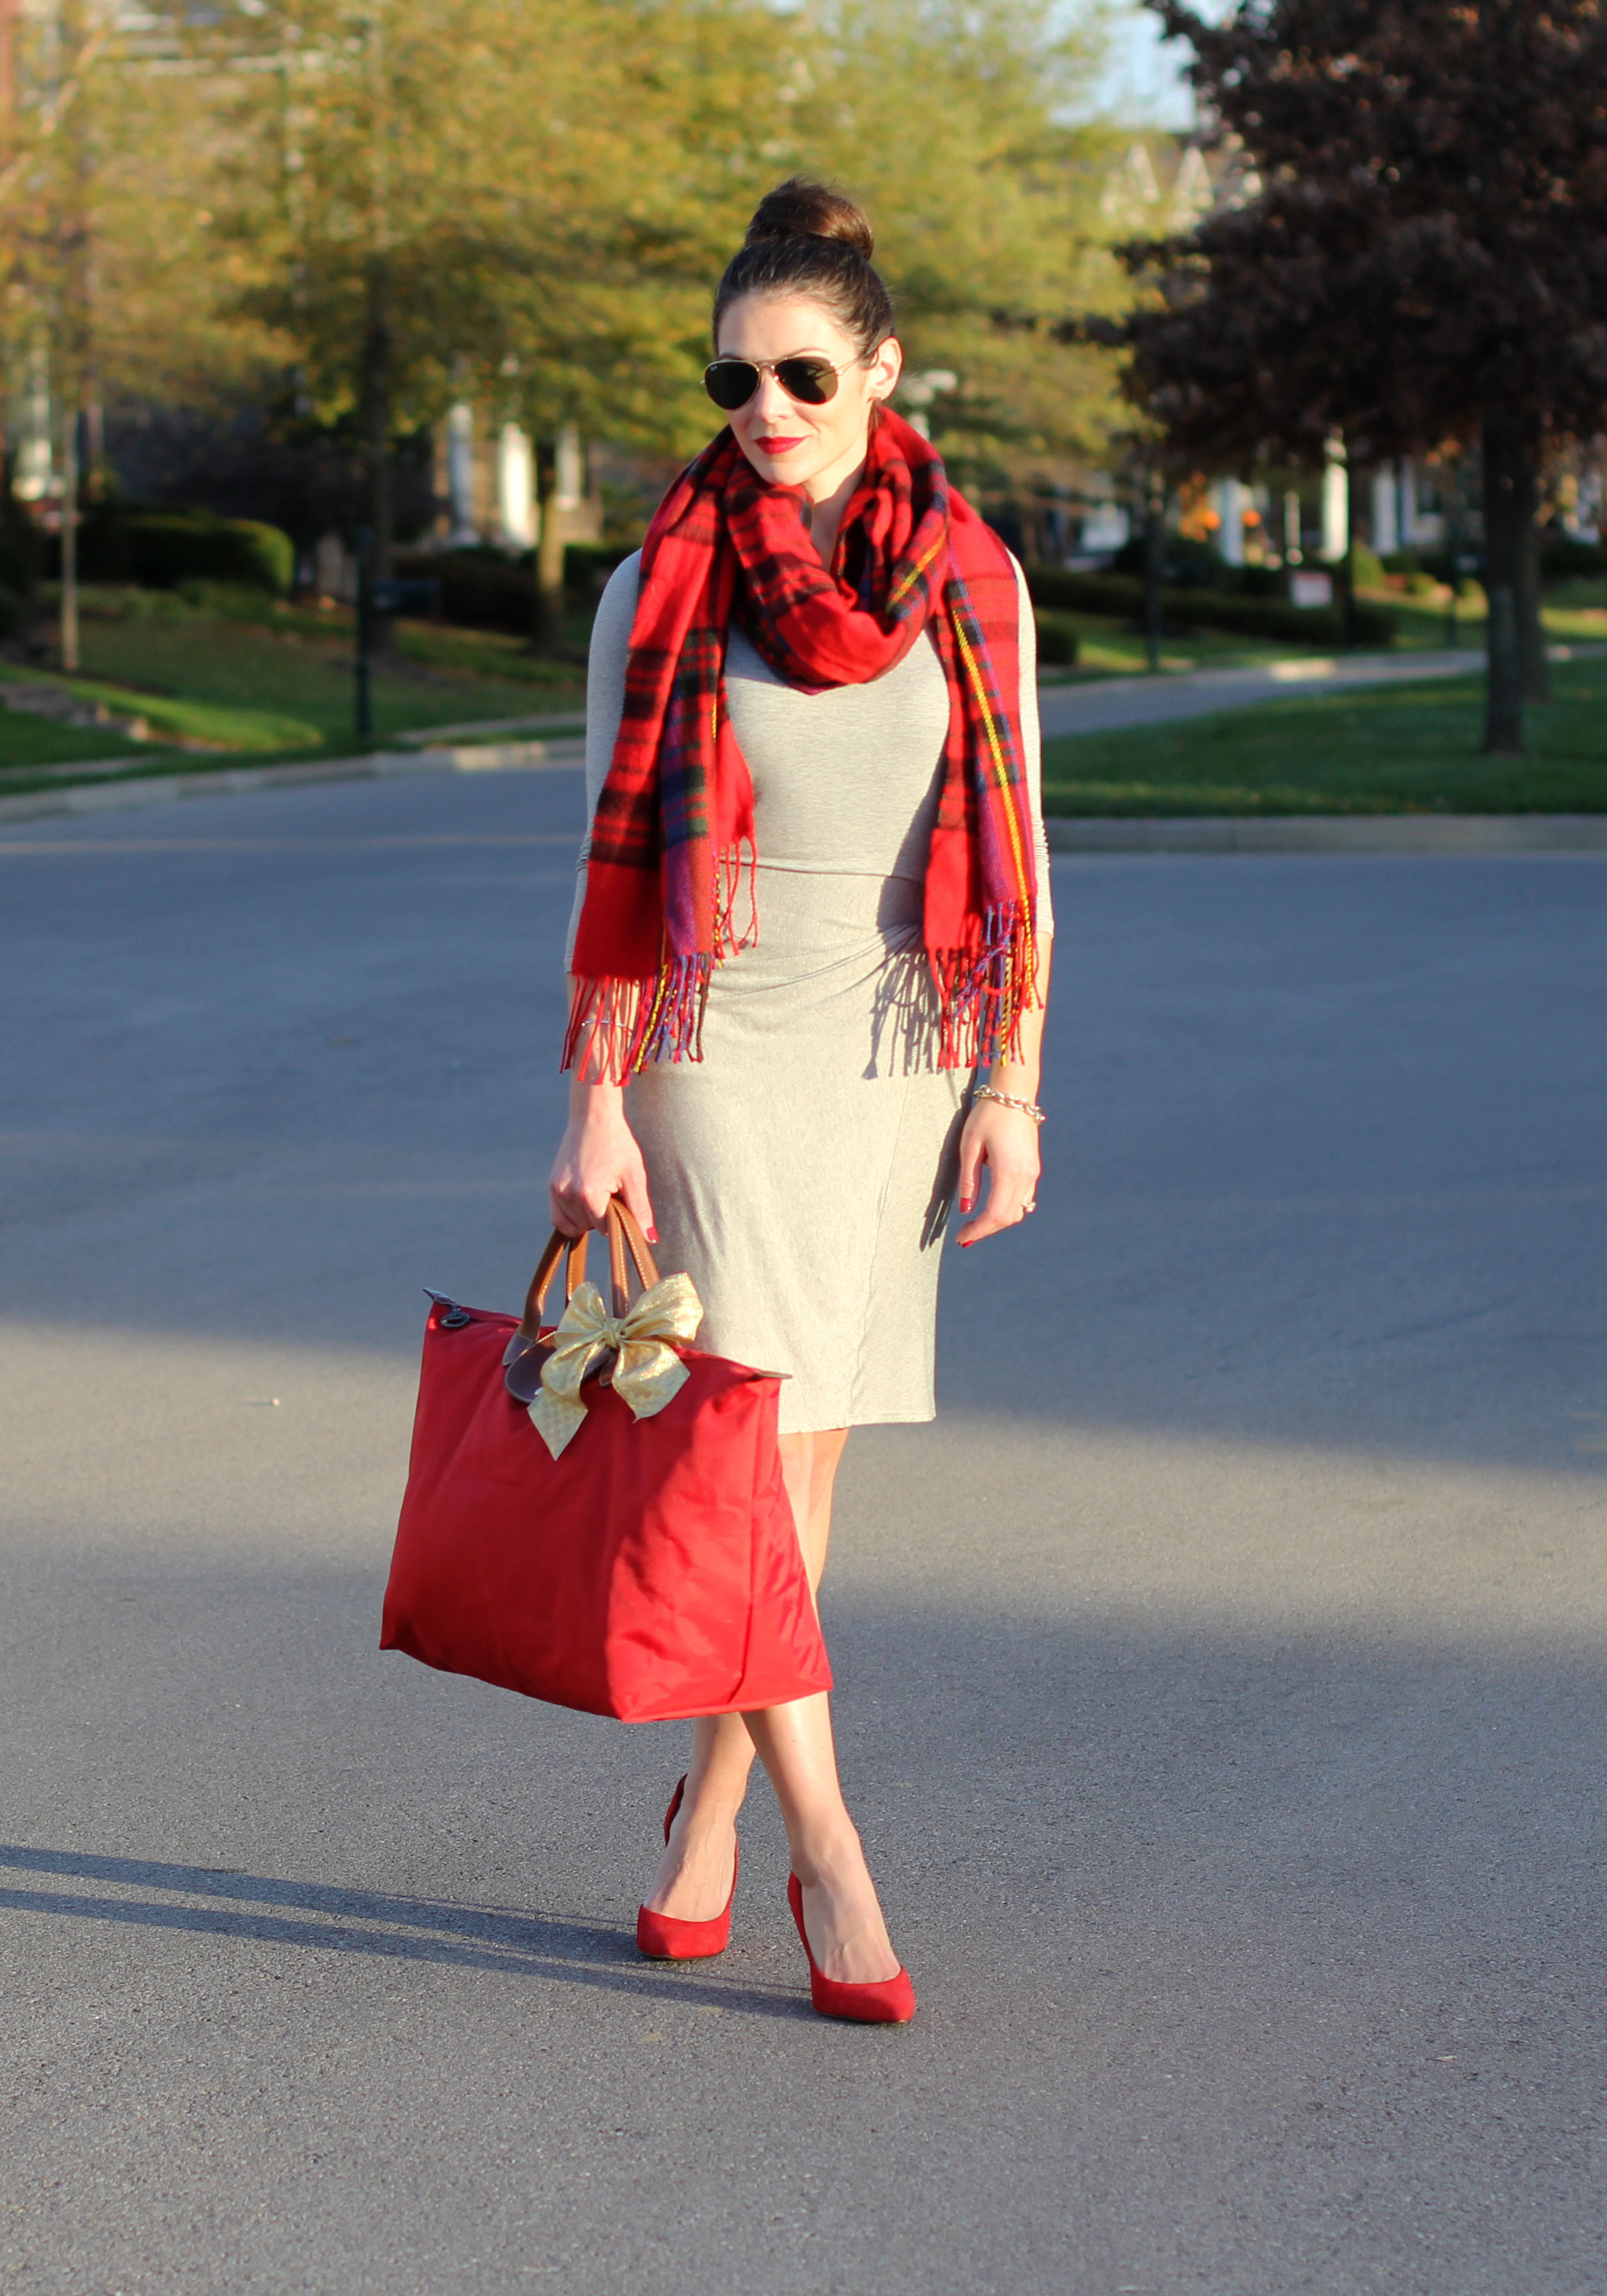 Anthropologie Amadi Knotted Knit Dress, Plaid Blanket Scard, Red Jessica Simpson Claudette Pumps, Casual Christmas Party Outfit, Red Longchamp